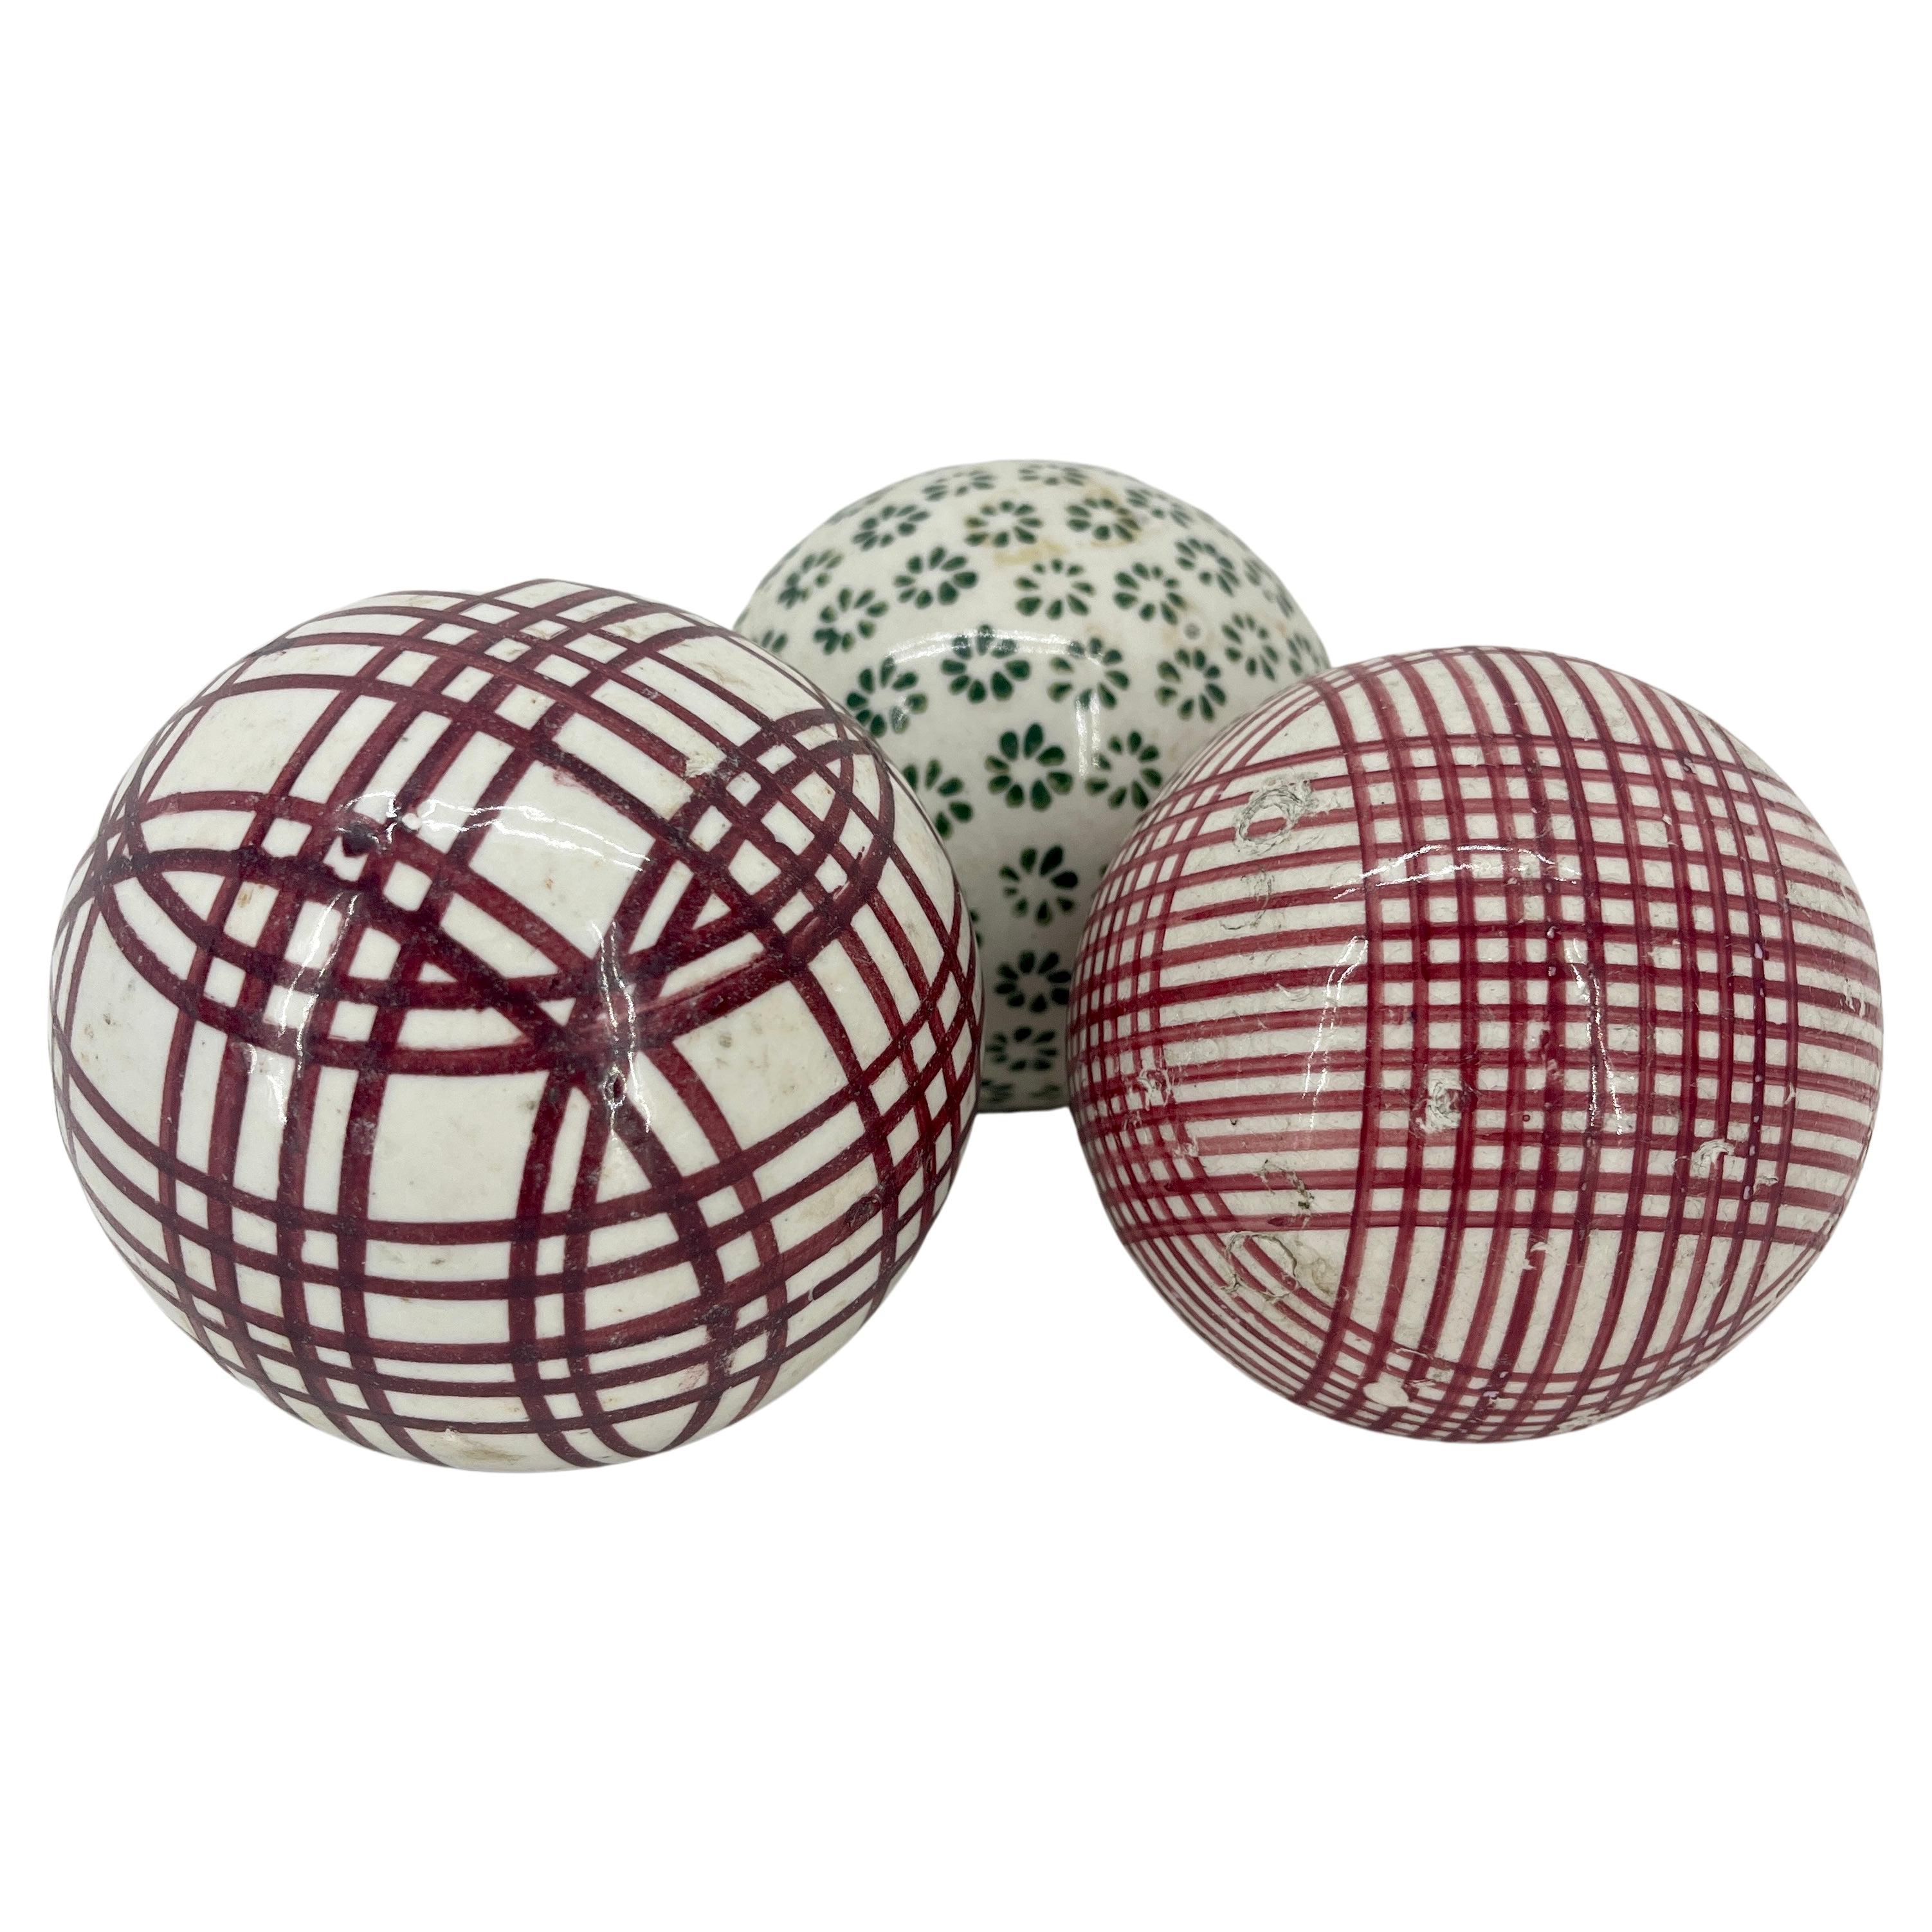 Set of three scottish stoneware carpet rug balls.

Carpet balls in reds and green. A storied game dating back Centuries, Carpet Ball is similar to Bocci Ball. An indoor game, a set of pins is set up in a hallway, and each player is given a set of